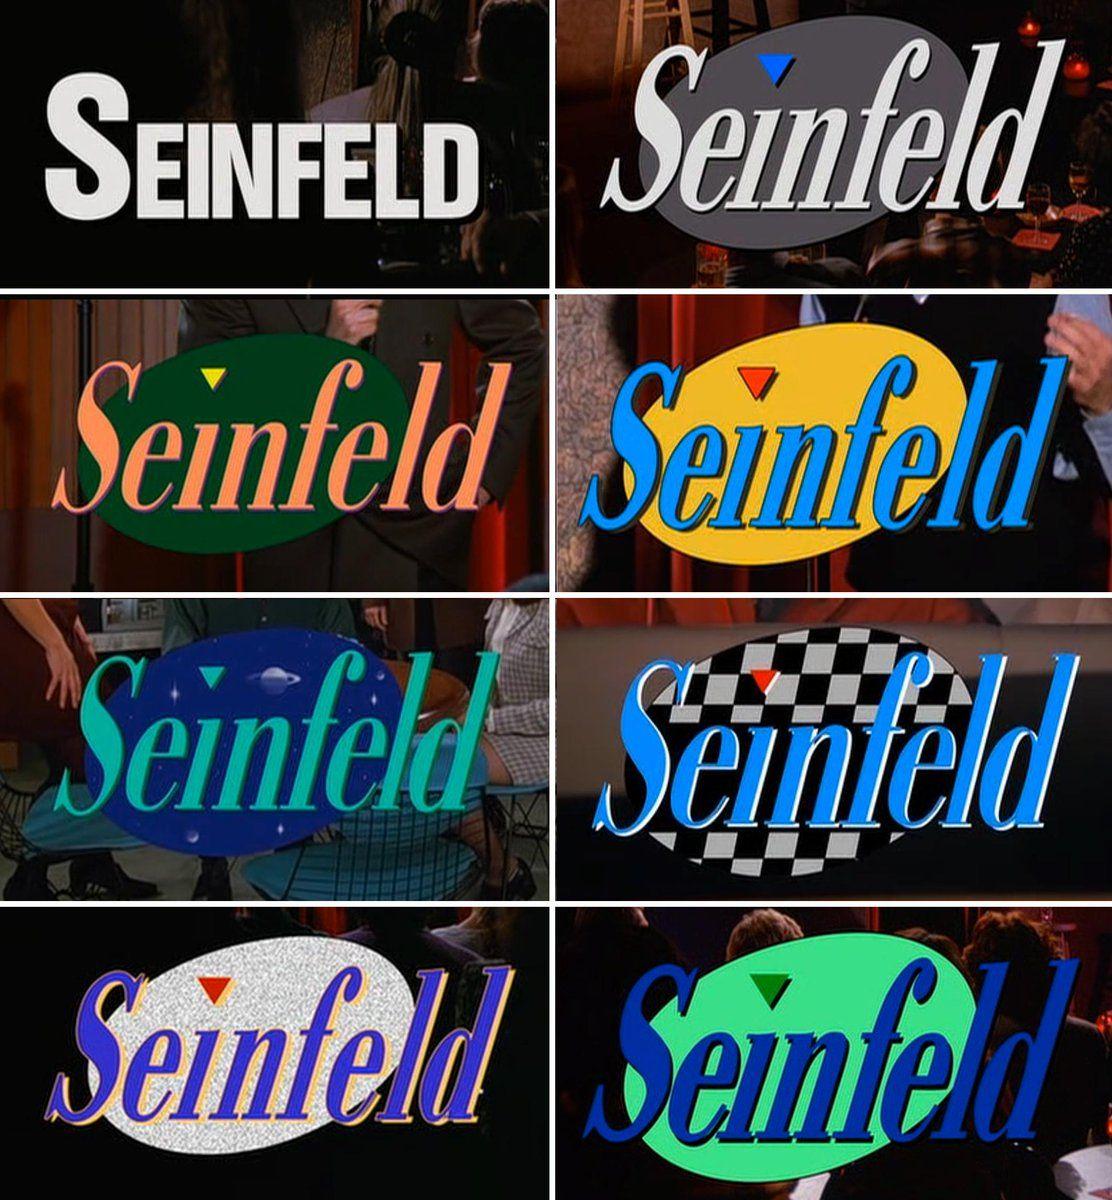 Seinfeld Logo - Seinfeld Current Day the seinfeld logo colorways